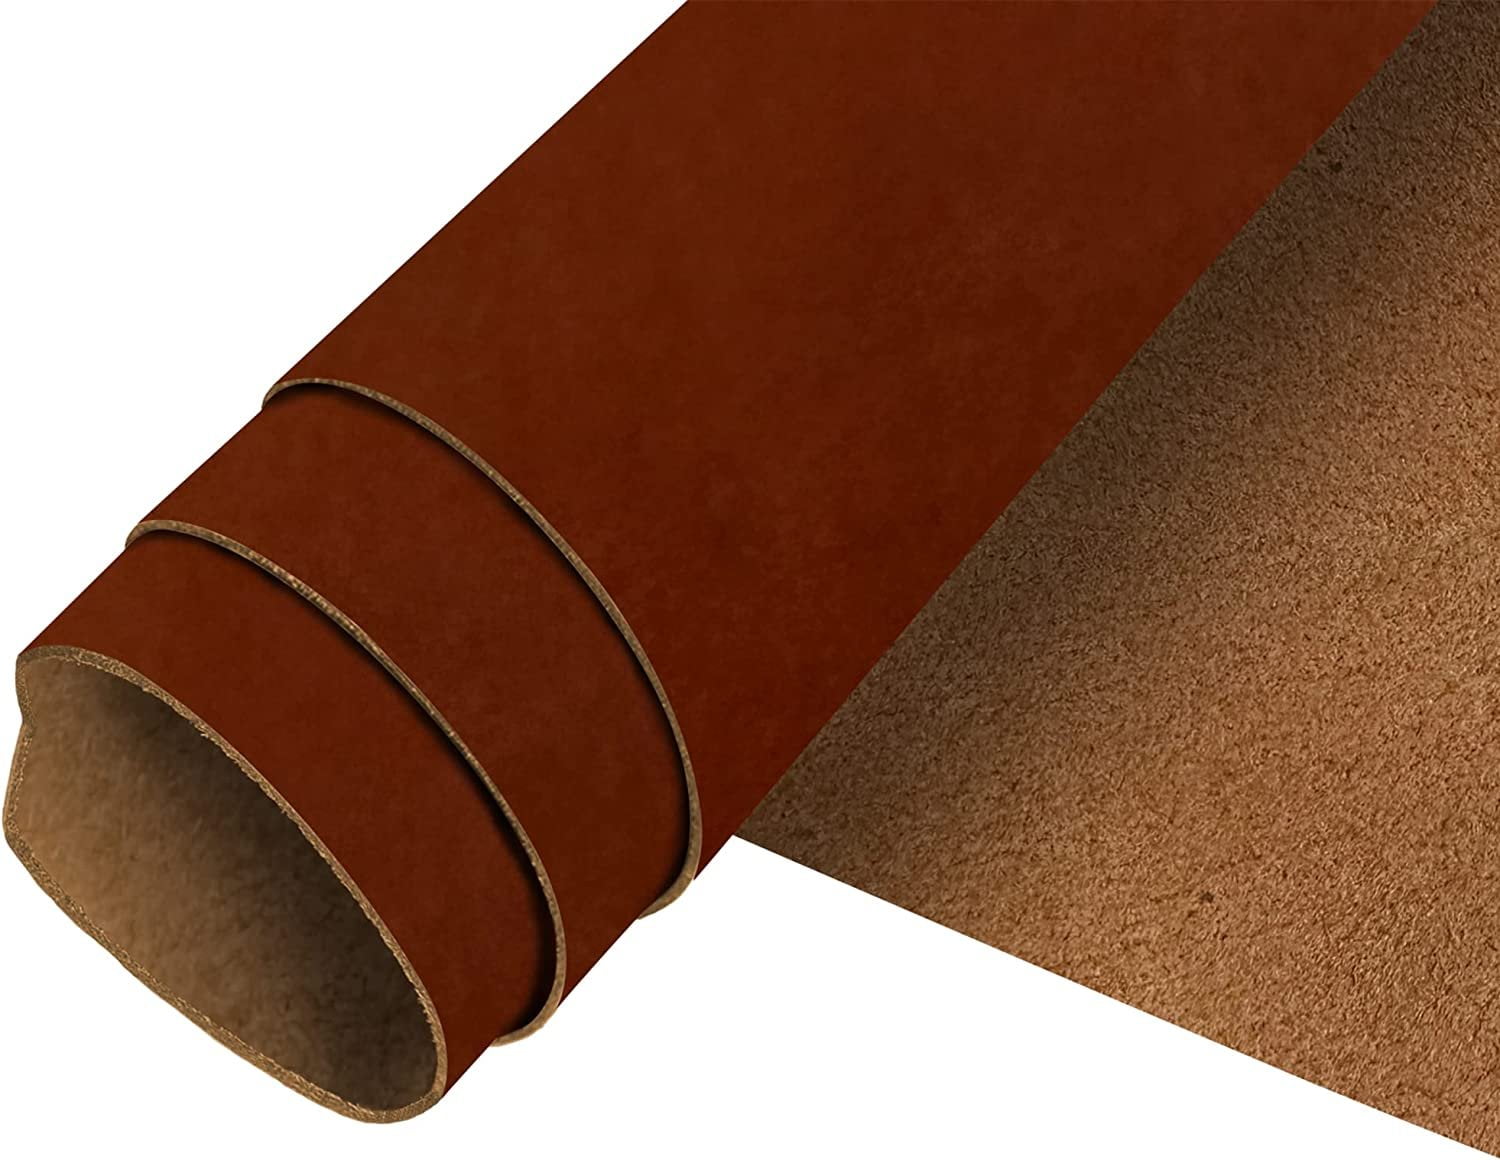 ELW Tooling Leather 5/6 OZ 2-2.4mm Thickness Rust Color Pre-Cut 8x8  Finished Full Grain Leather Cowhide Handmade Perfect for Crafting, Sewing